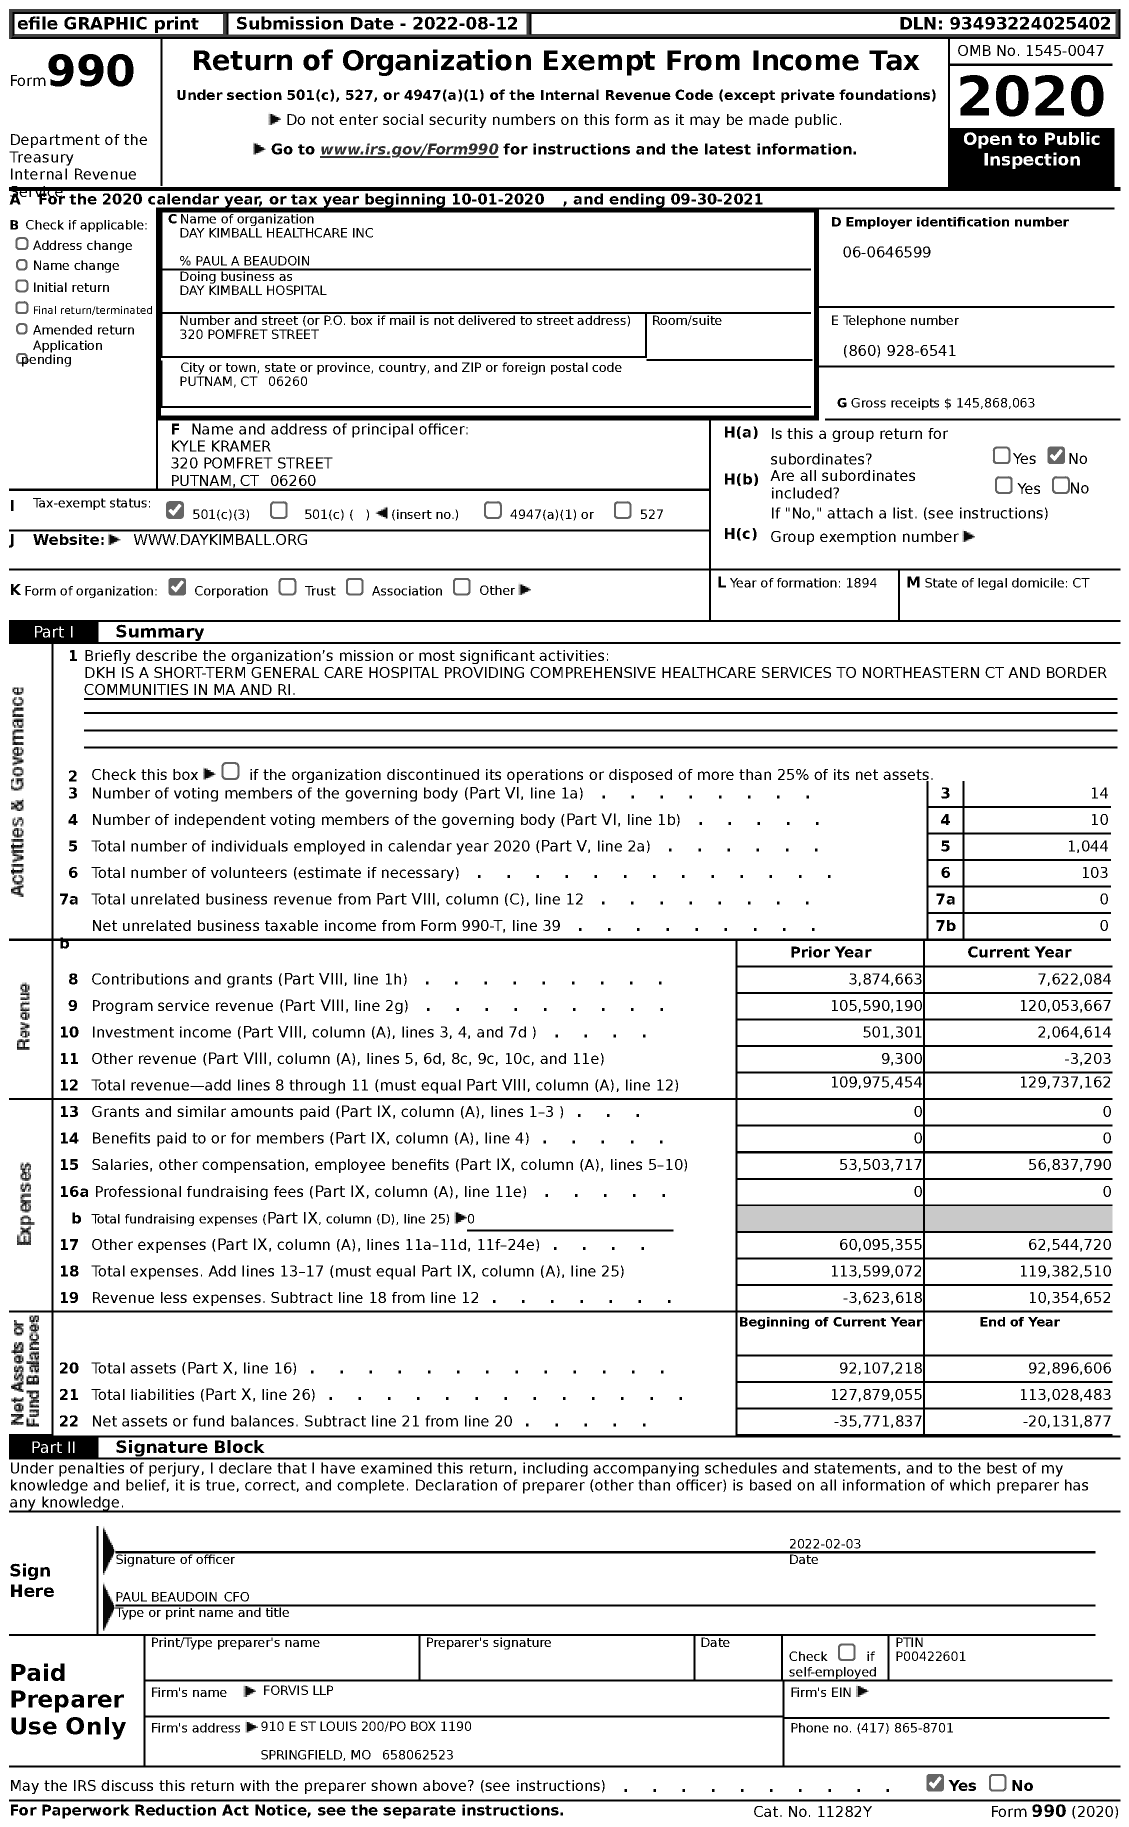 Image of first page of 2020 Form 990 for Day Kimball Healthcare (DKH)